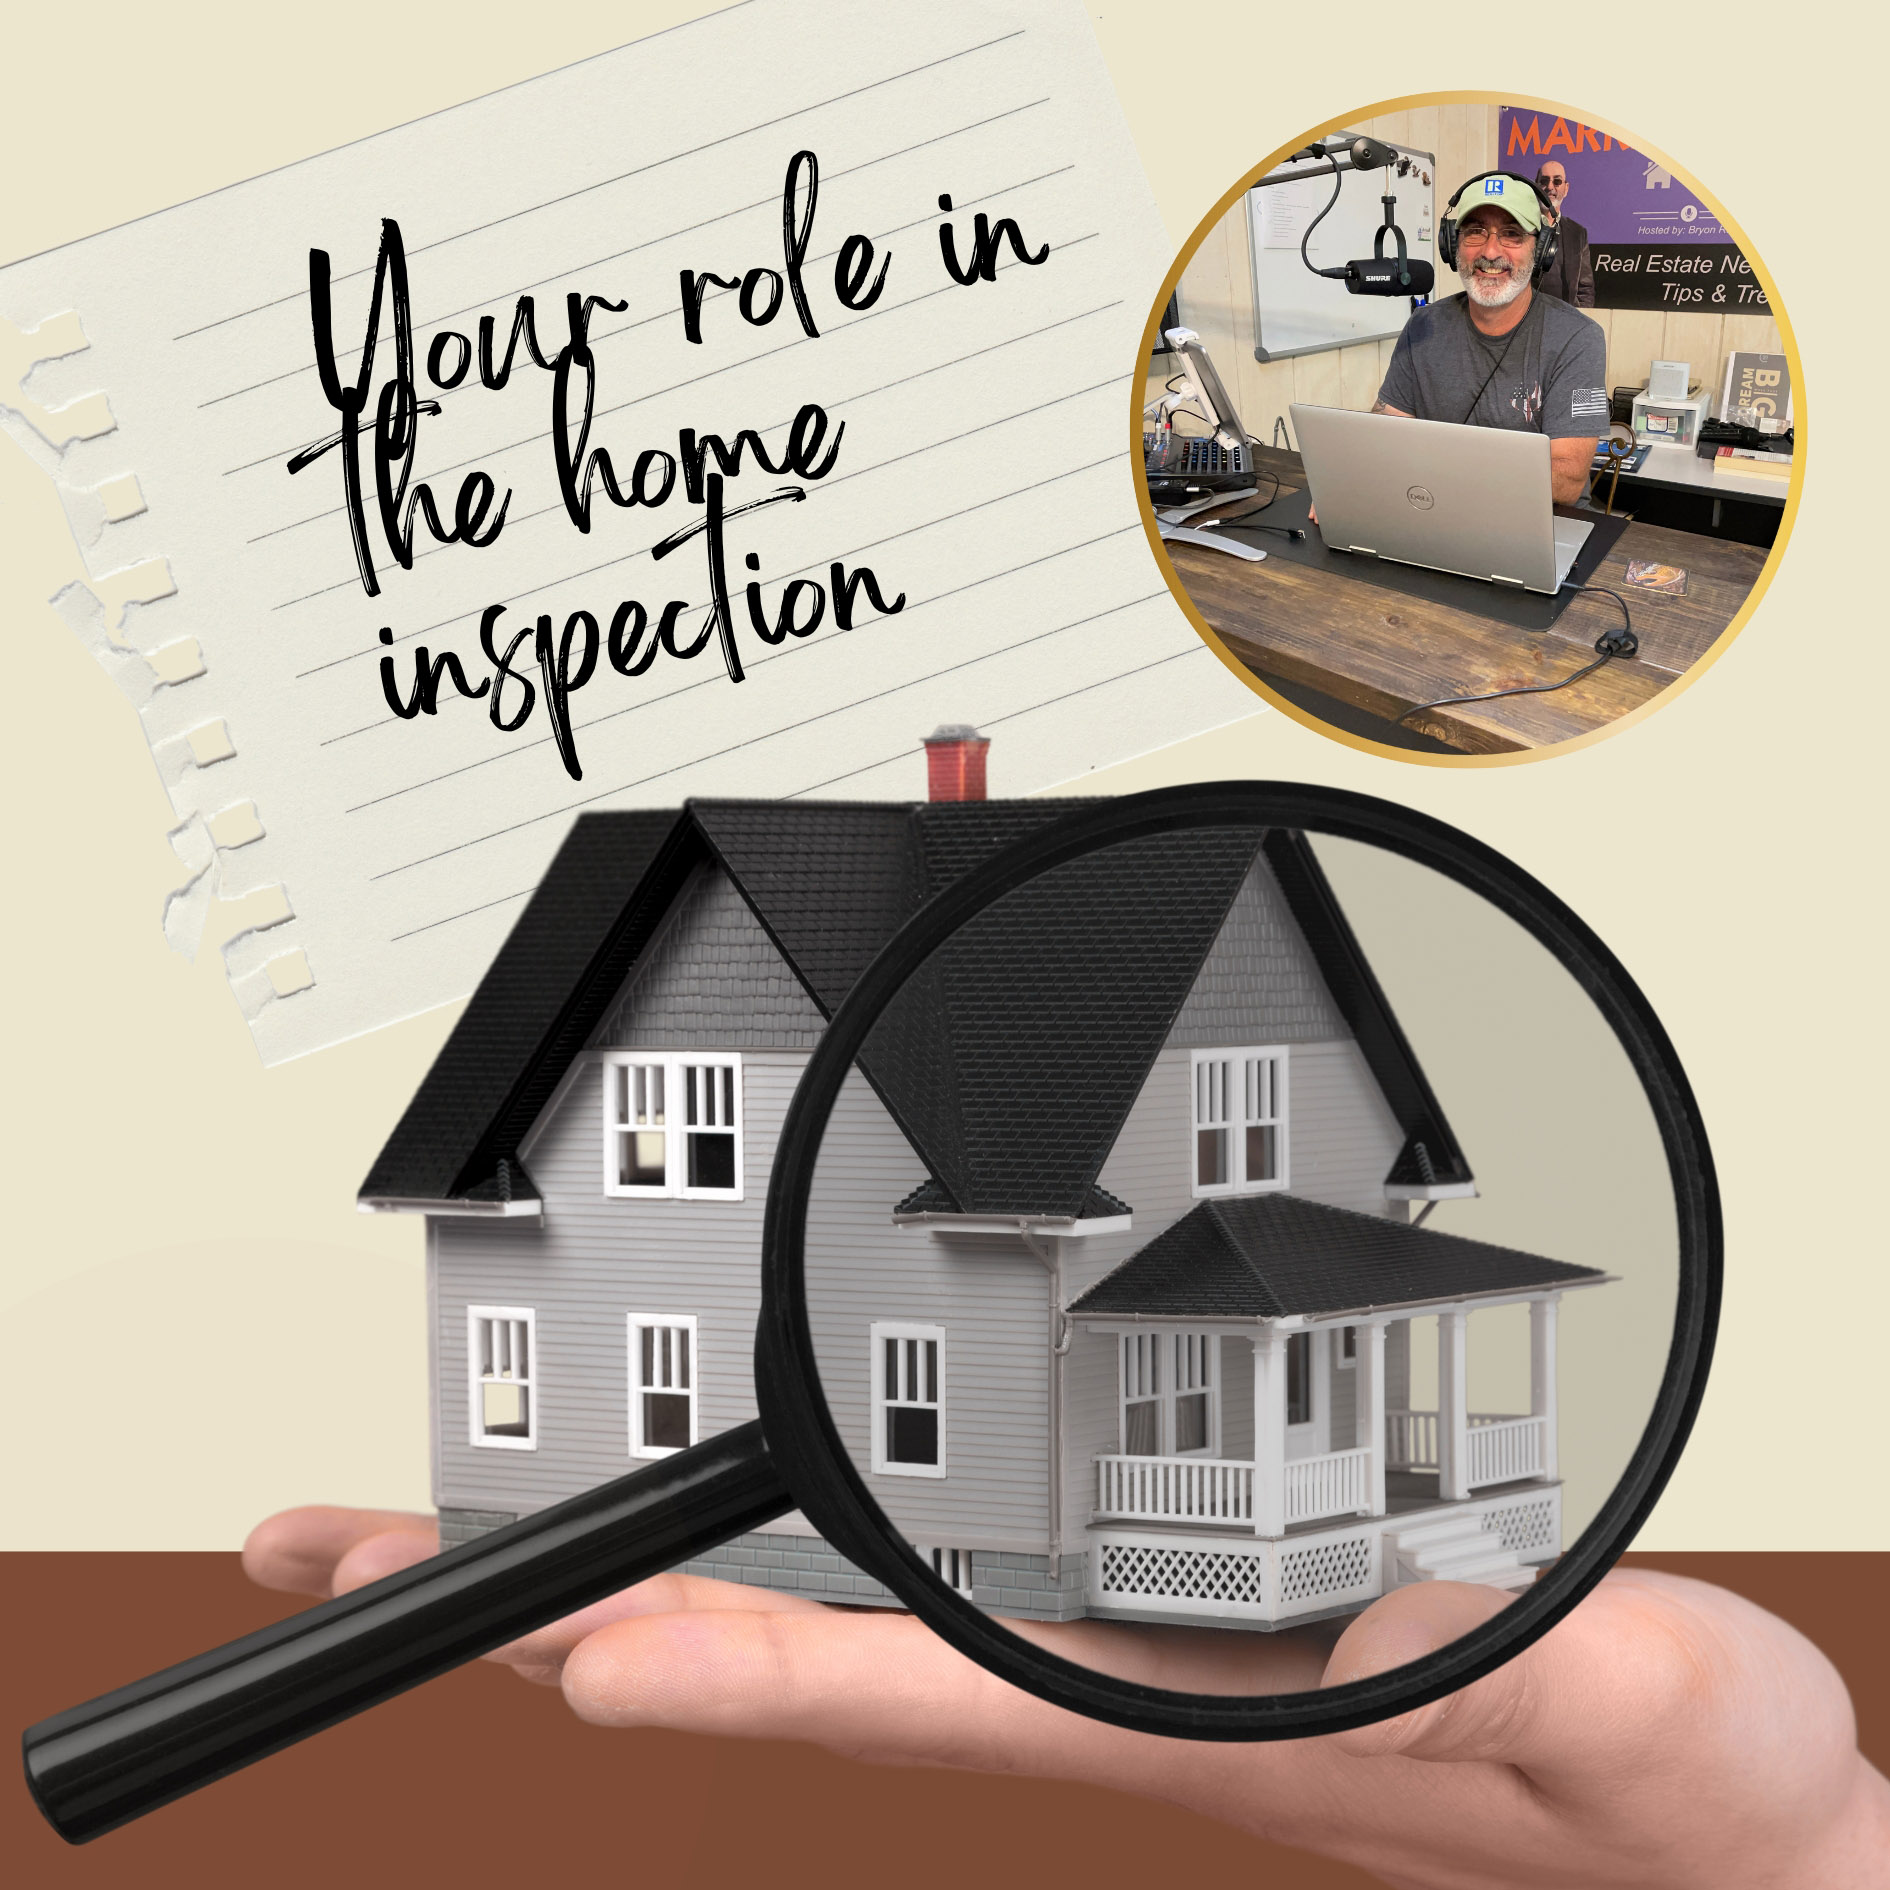 Your role in the home inspection